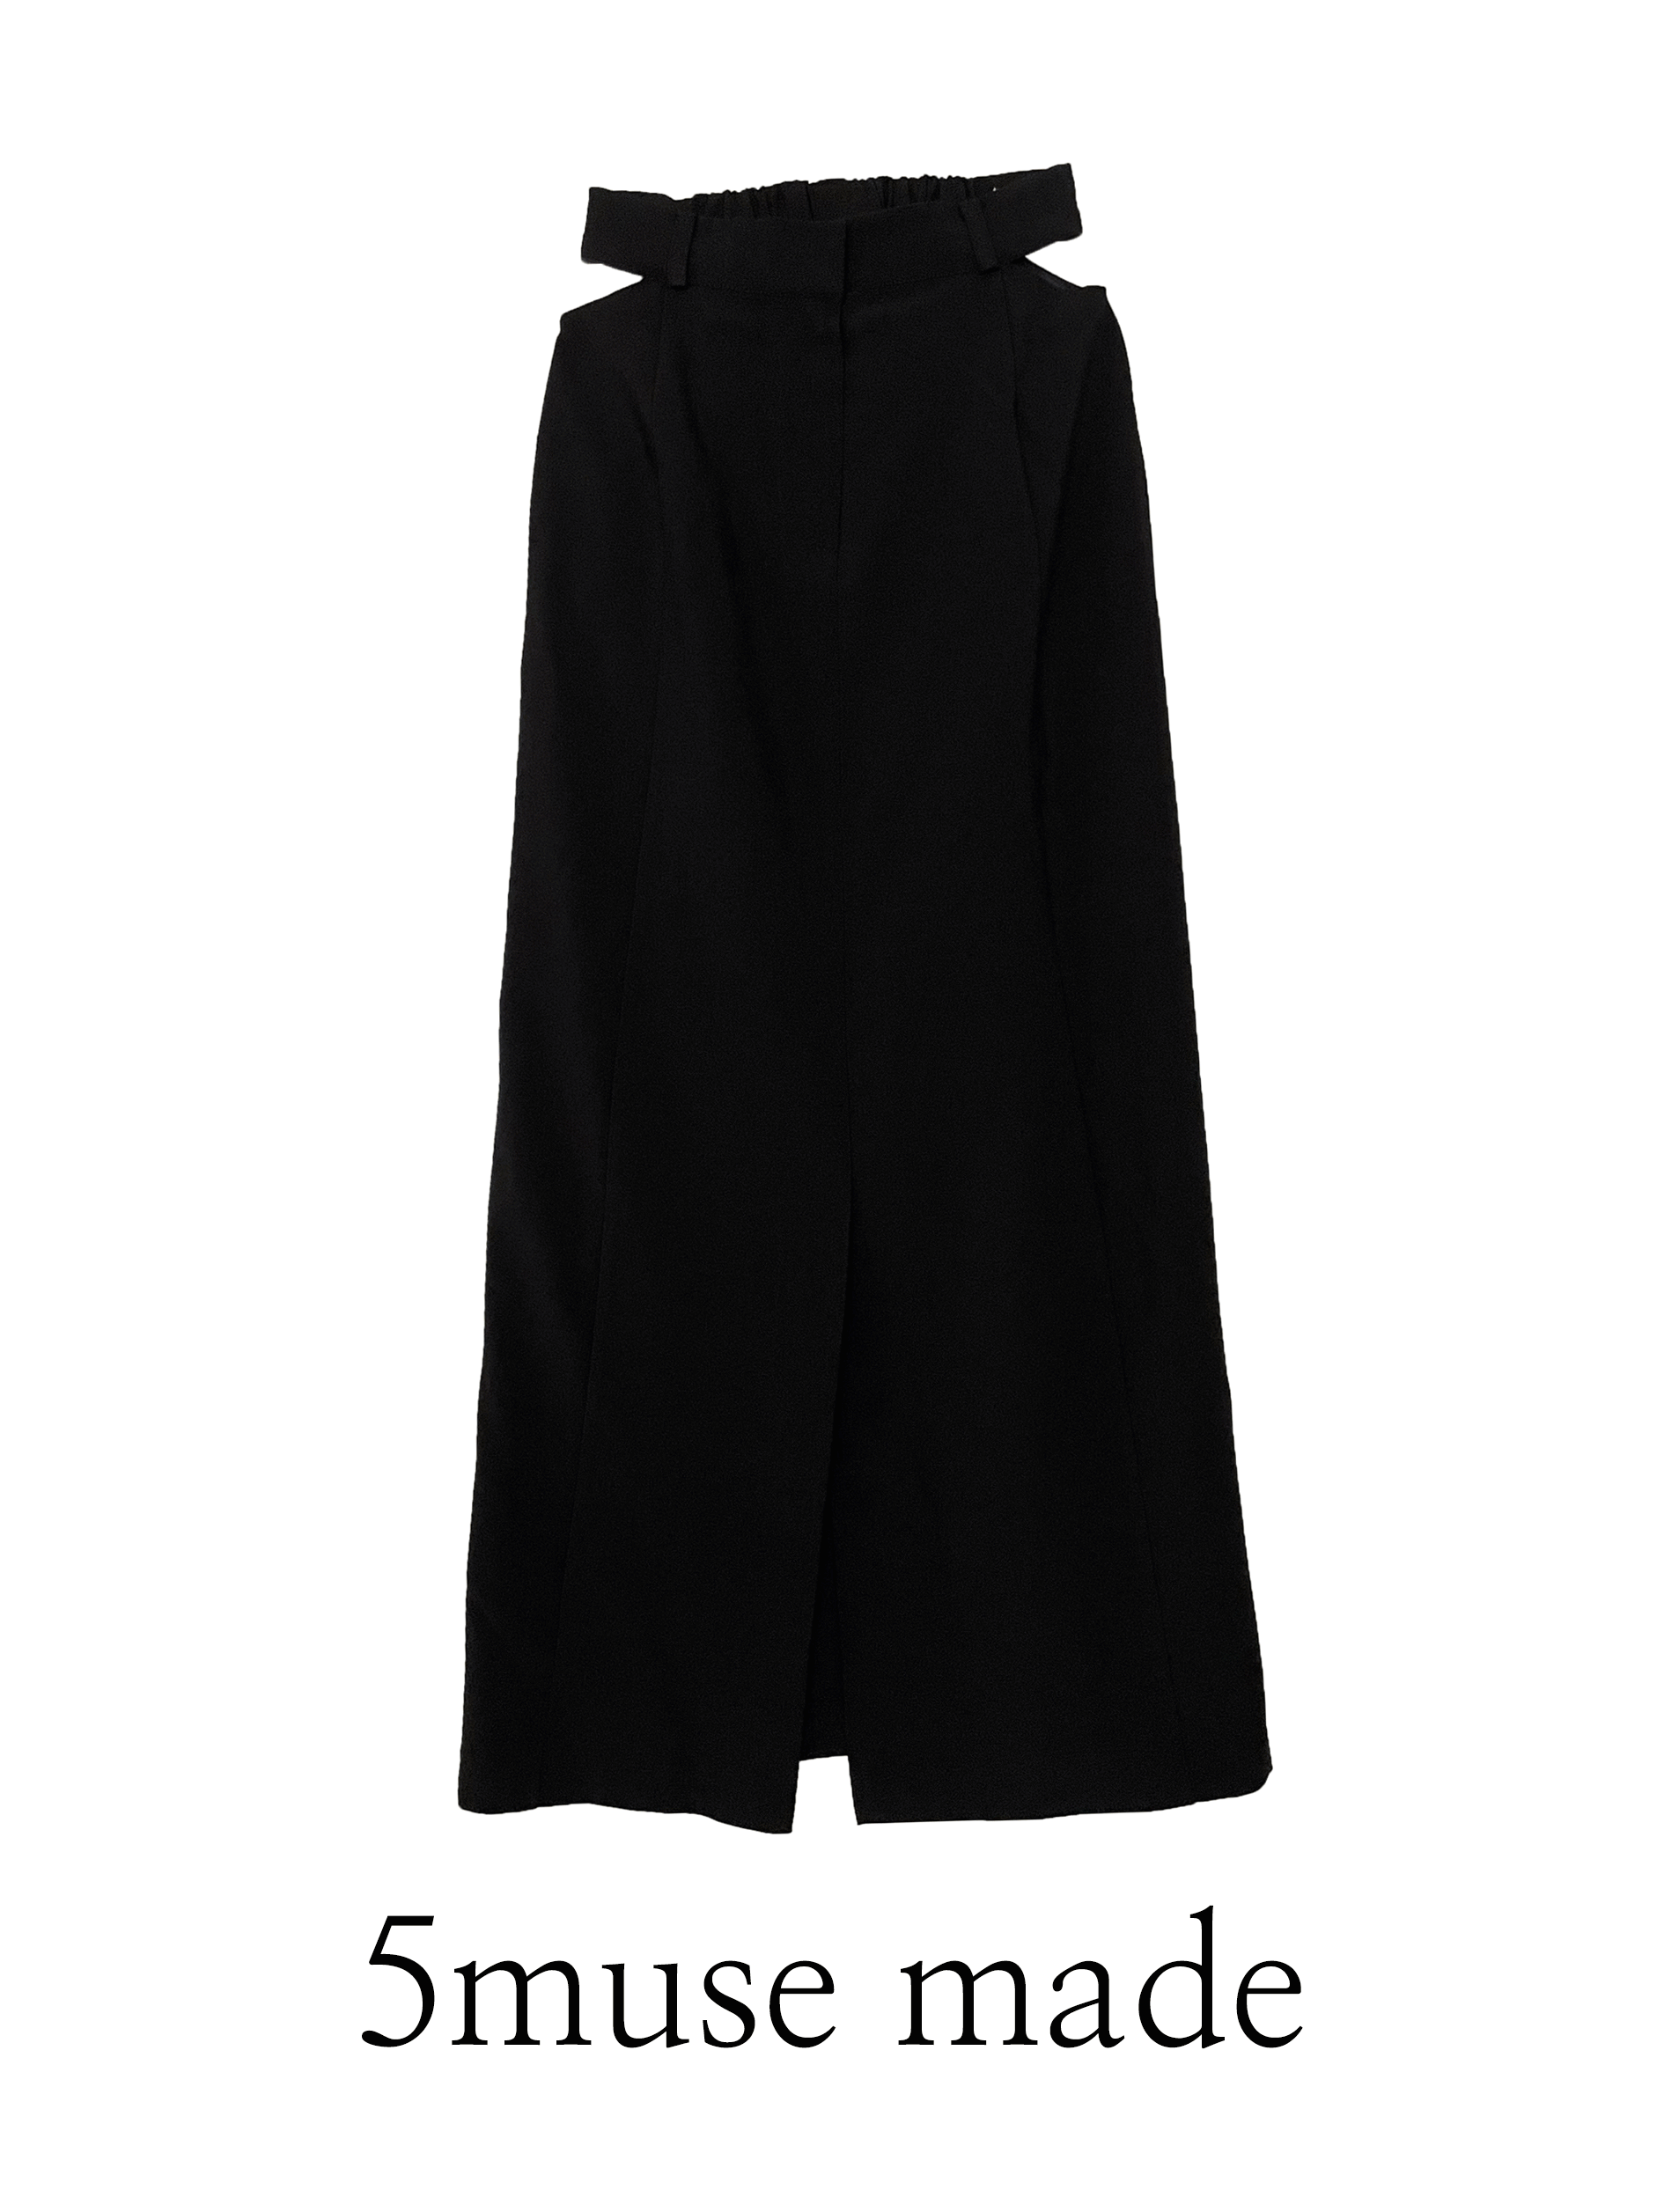 [5muse made] Muse slit maxi skirt - Black (당일발송)